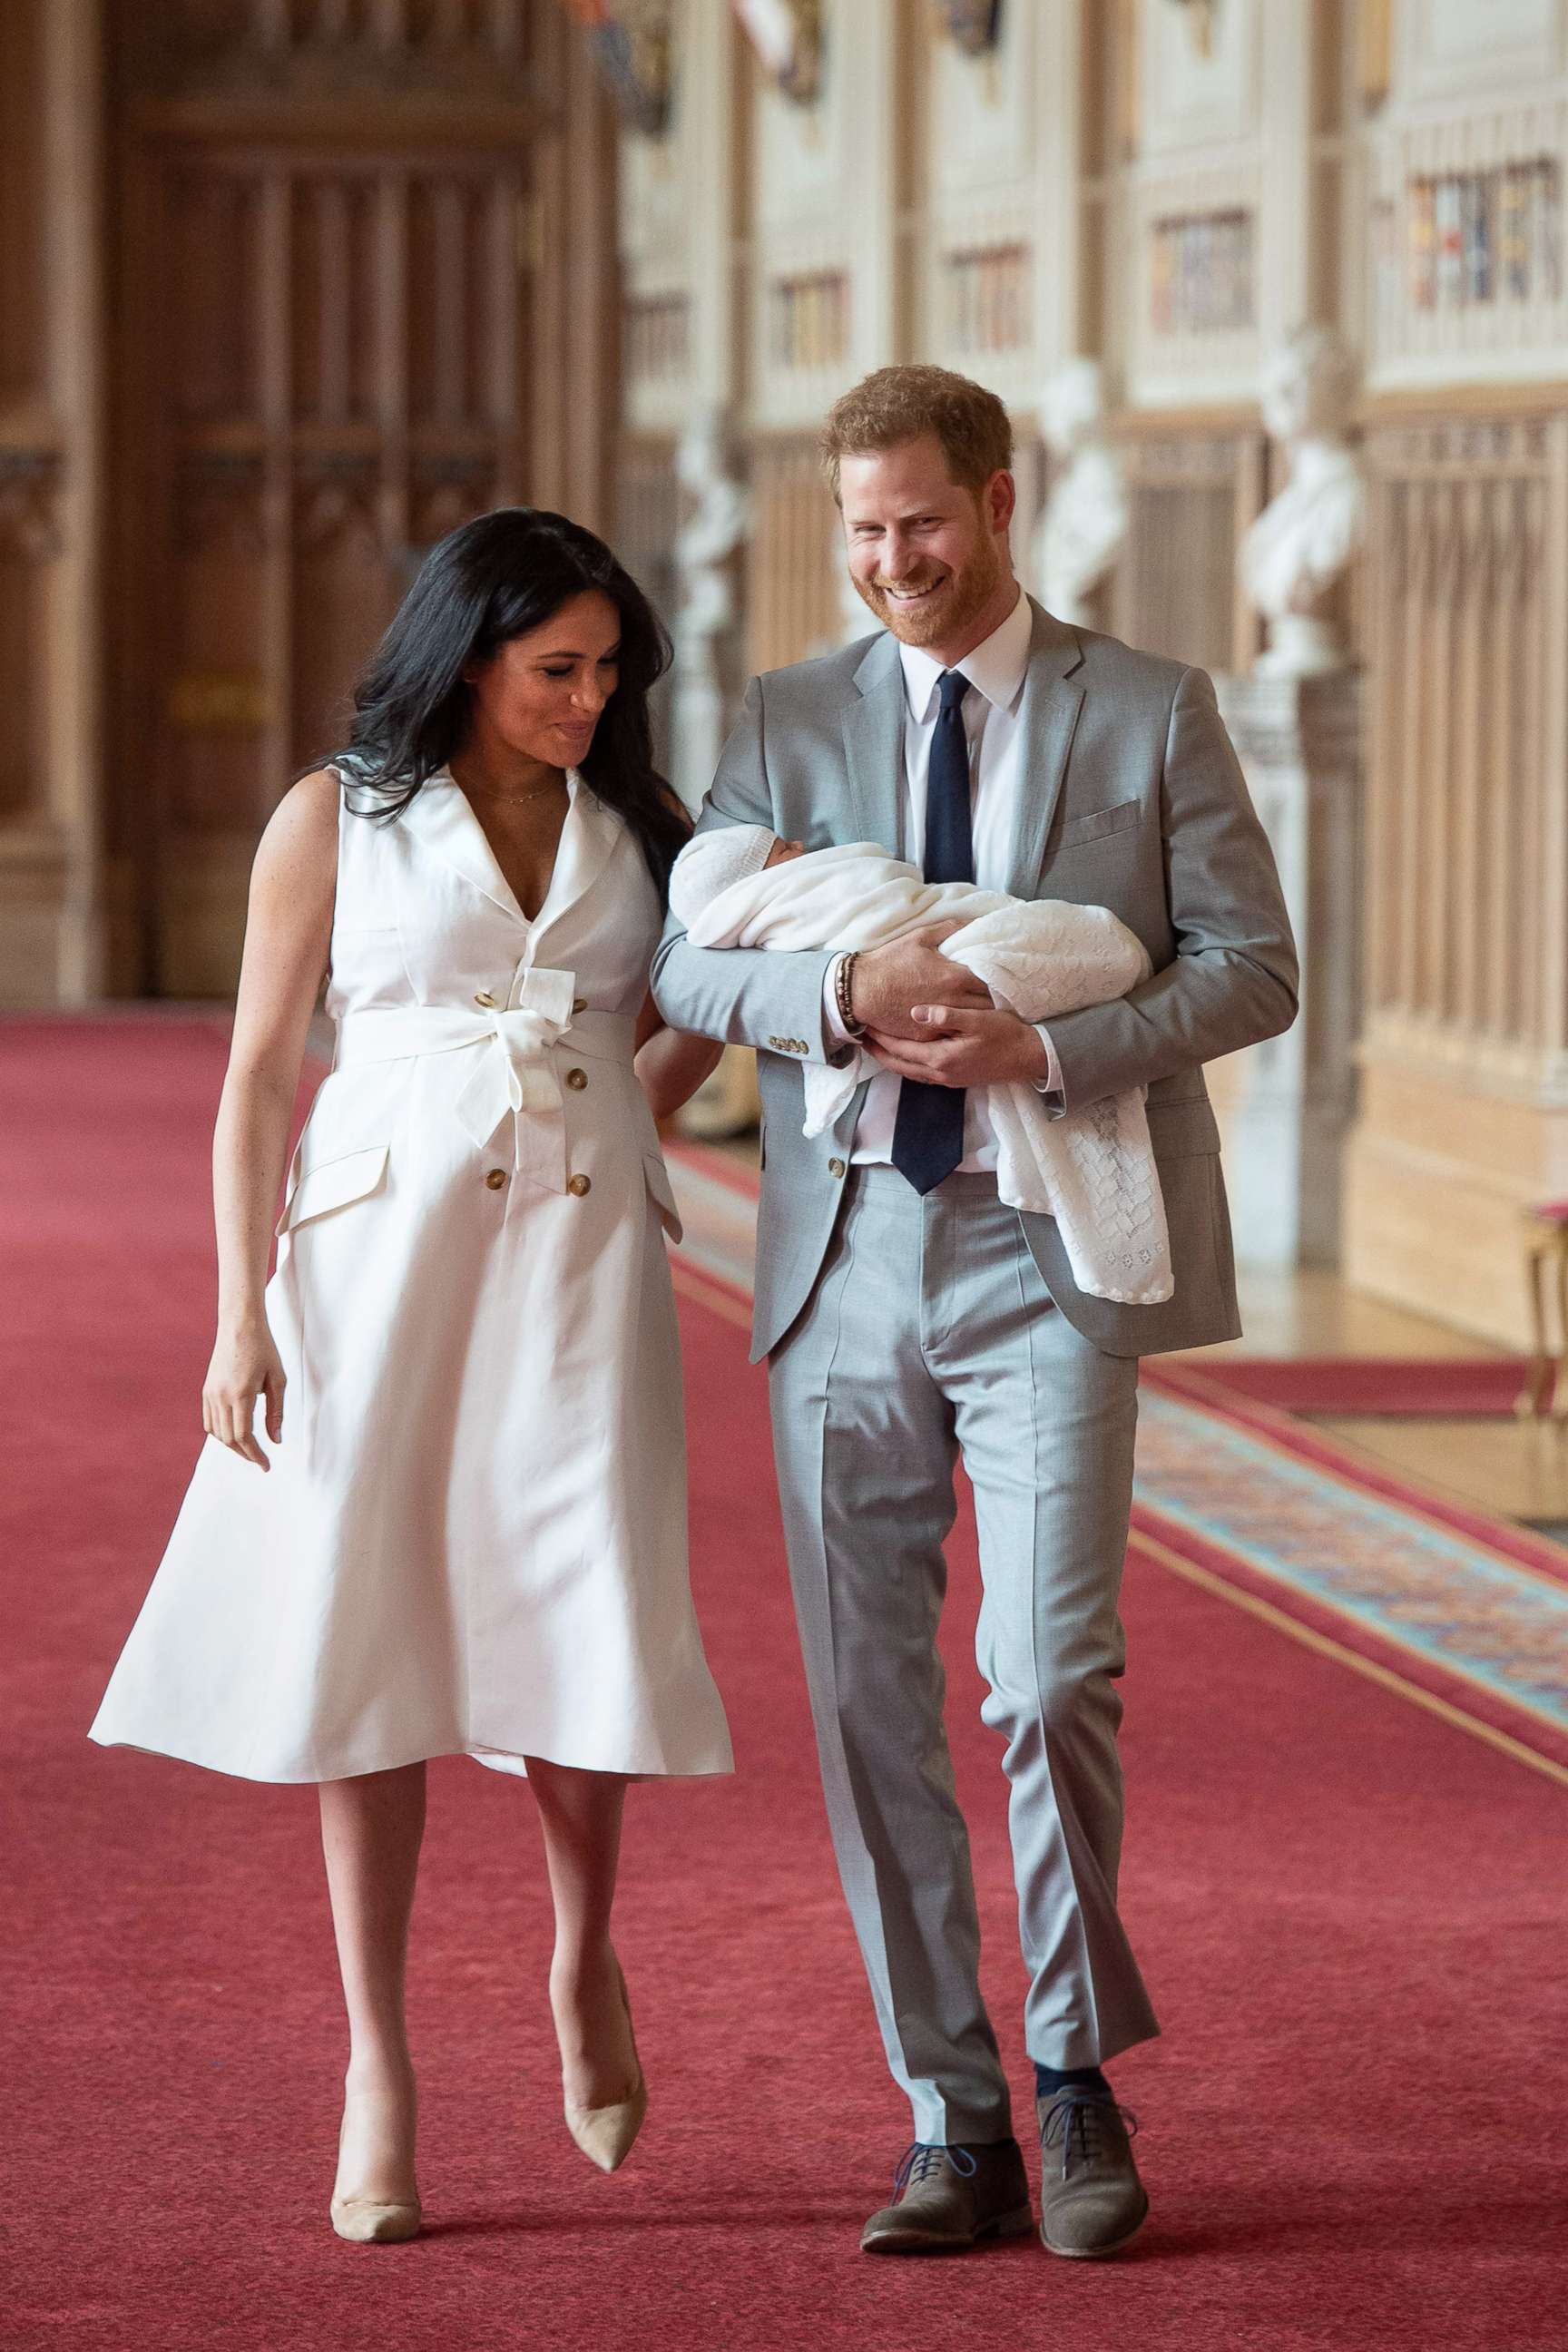 PHOTO: Britain's Prince Harry, Duke of Sussex and his wife Meghan, Duchess of Sussex, carry their newborn baby son in St George's Hall at Windsor Castle in Windsor, England, May 8, 2019.